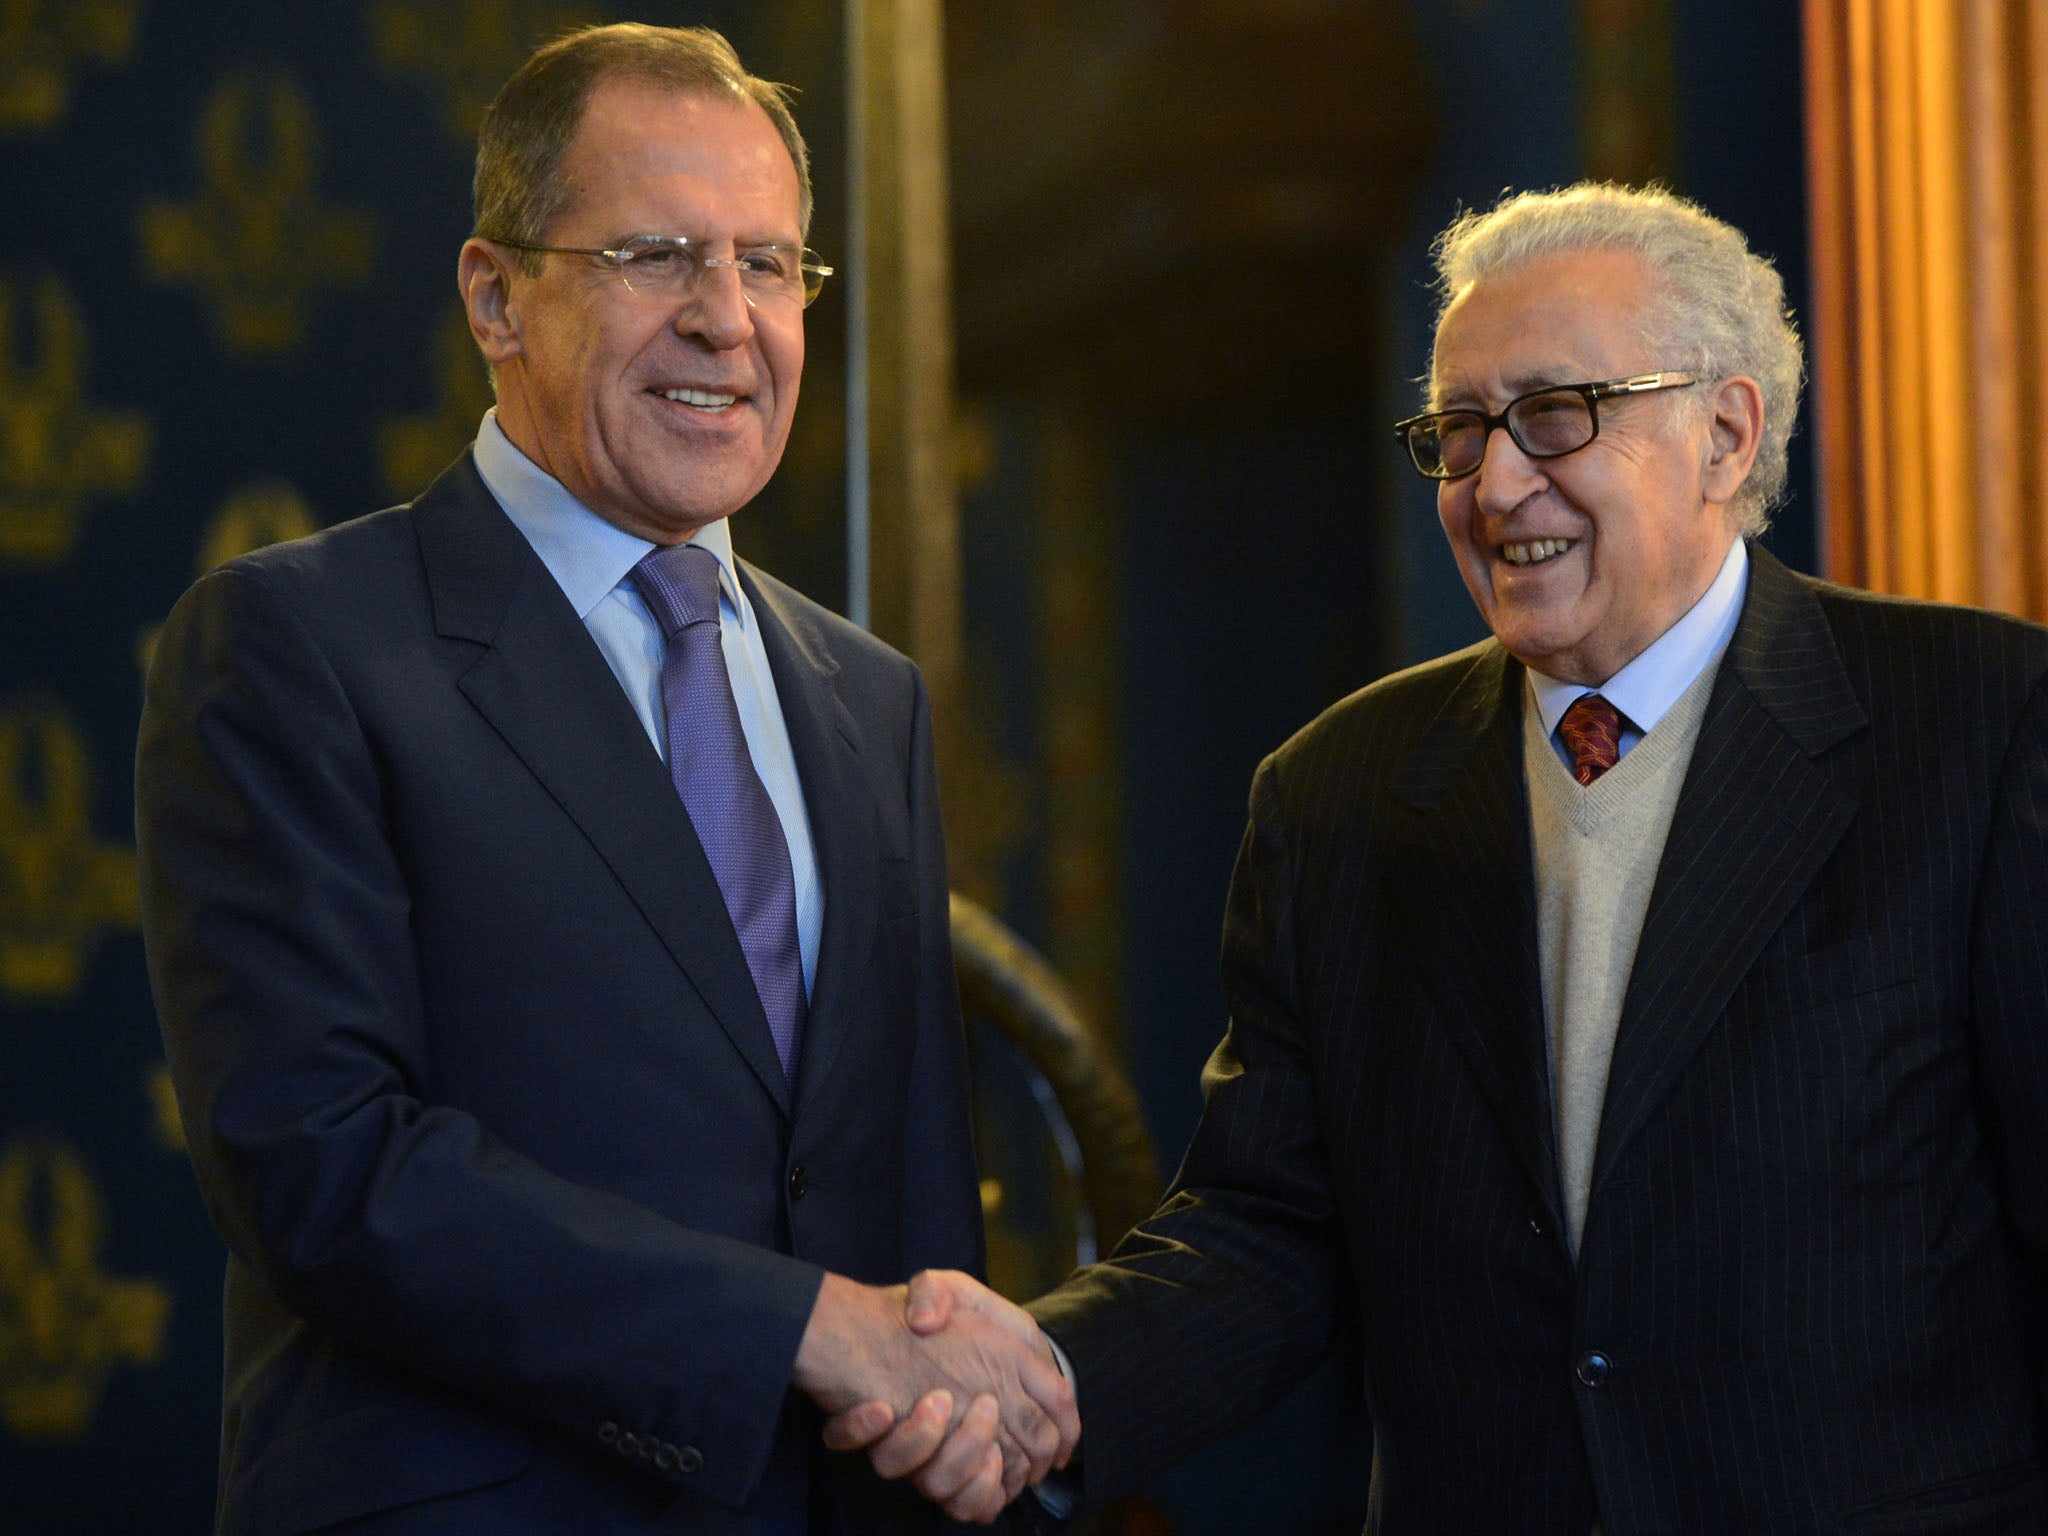 Russian Foreign Minister Sergei Lavrov (L) shake hands with UN-Arab League peace envoy Lakhdar Brahimi as they arrive for talks in Moscow